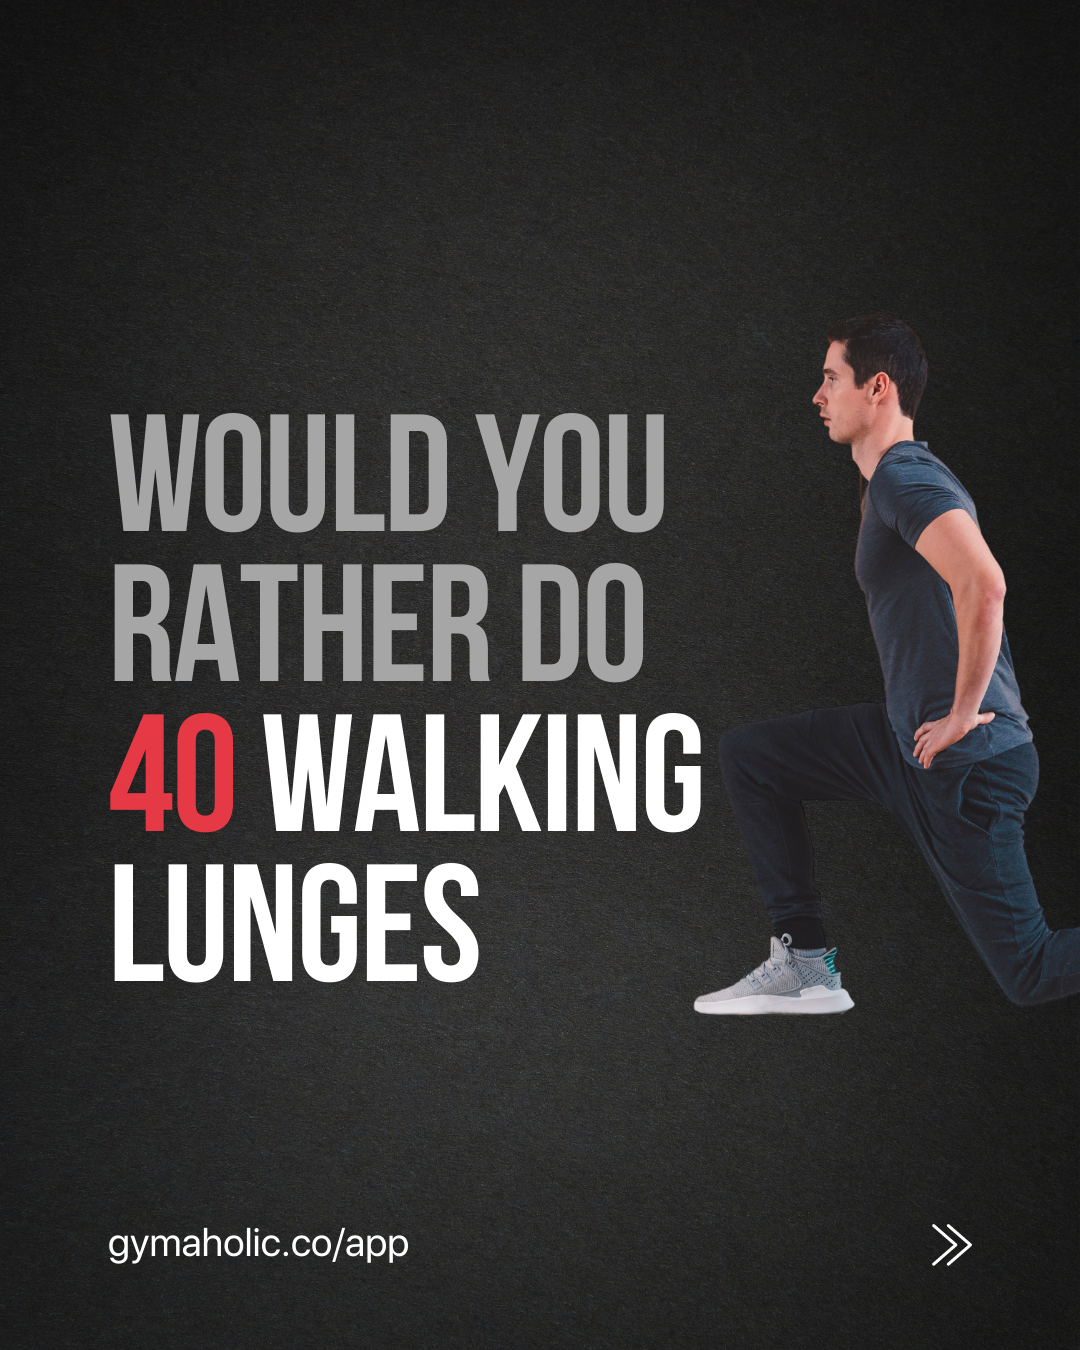 Would you rather do 40 walking lunges or 20 jumping lunges?